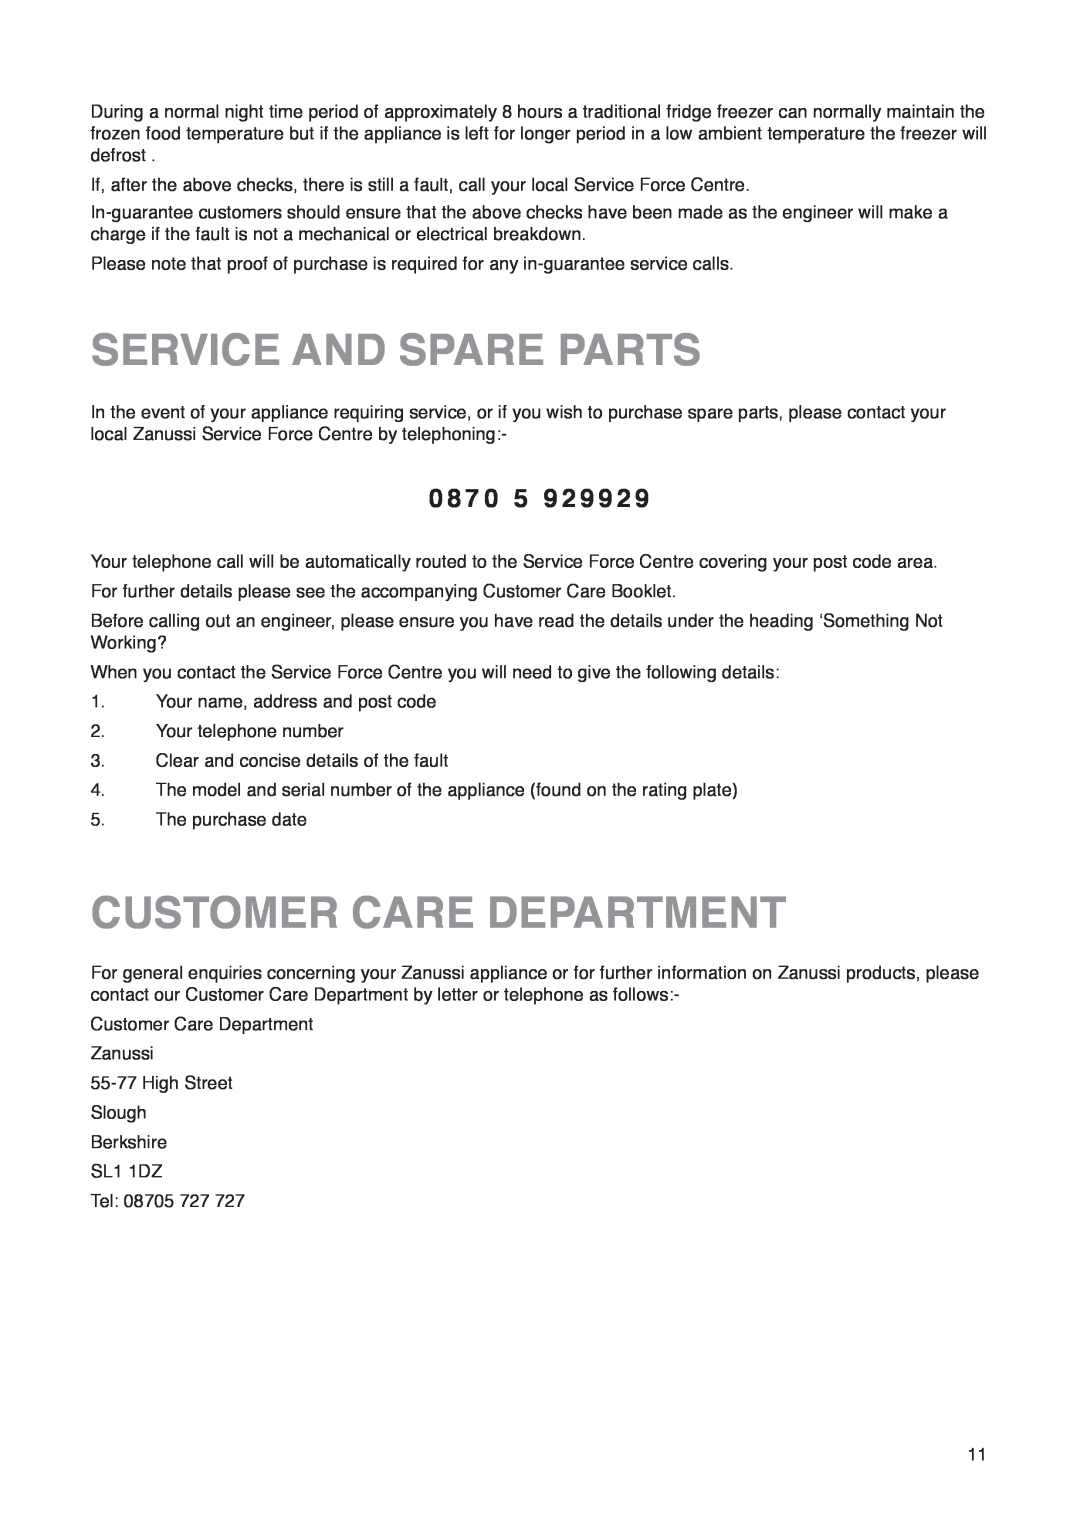 Zanussi ZK 53/37 R manual Service And Spare Parts, Customer Care Department, 0 8 7 0 5 9 